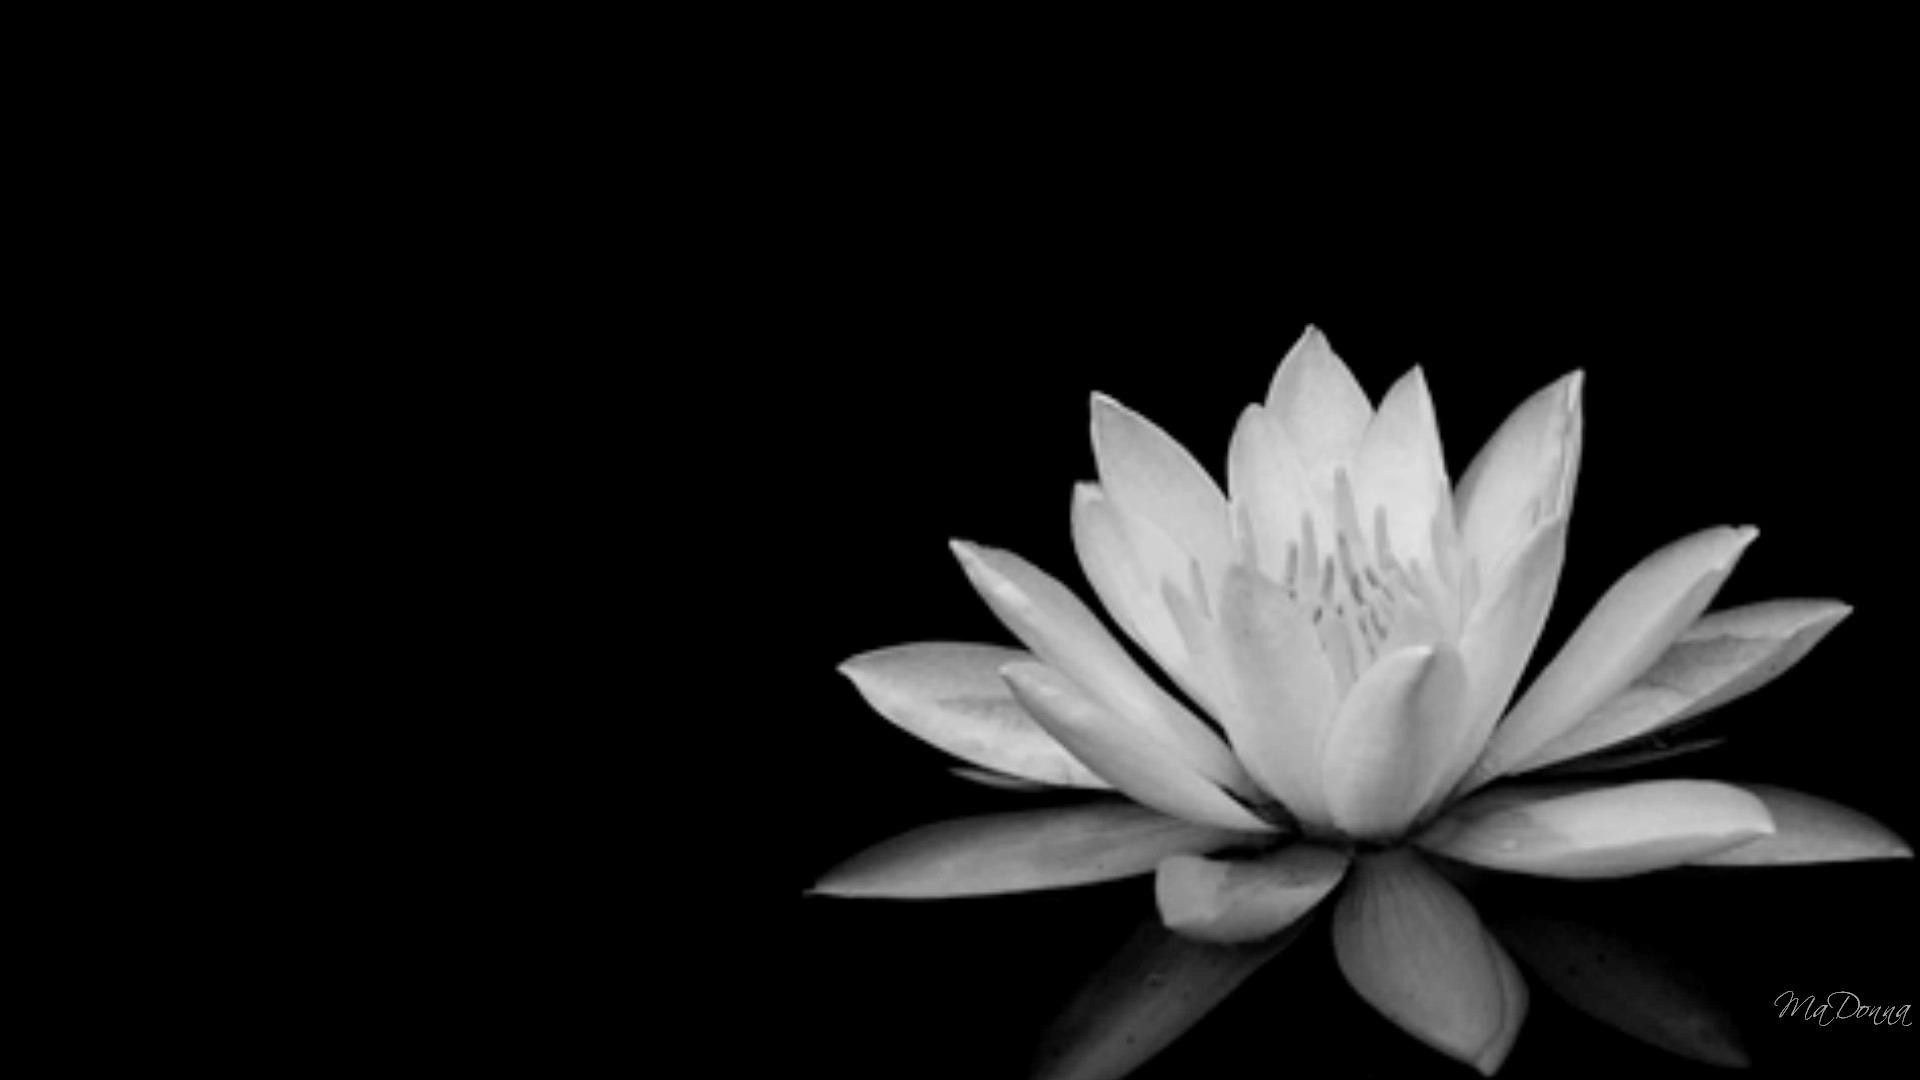 1920x1080 ... Black And White Flowers Background Black And White Flowers Wallpapers  Hd | Pixelstalk ...